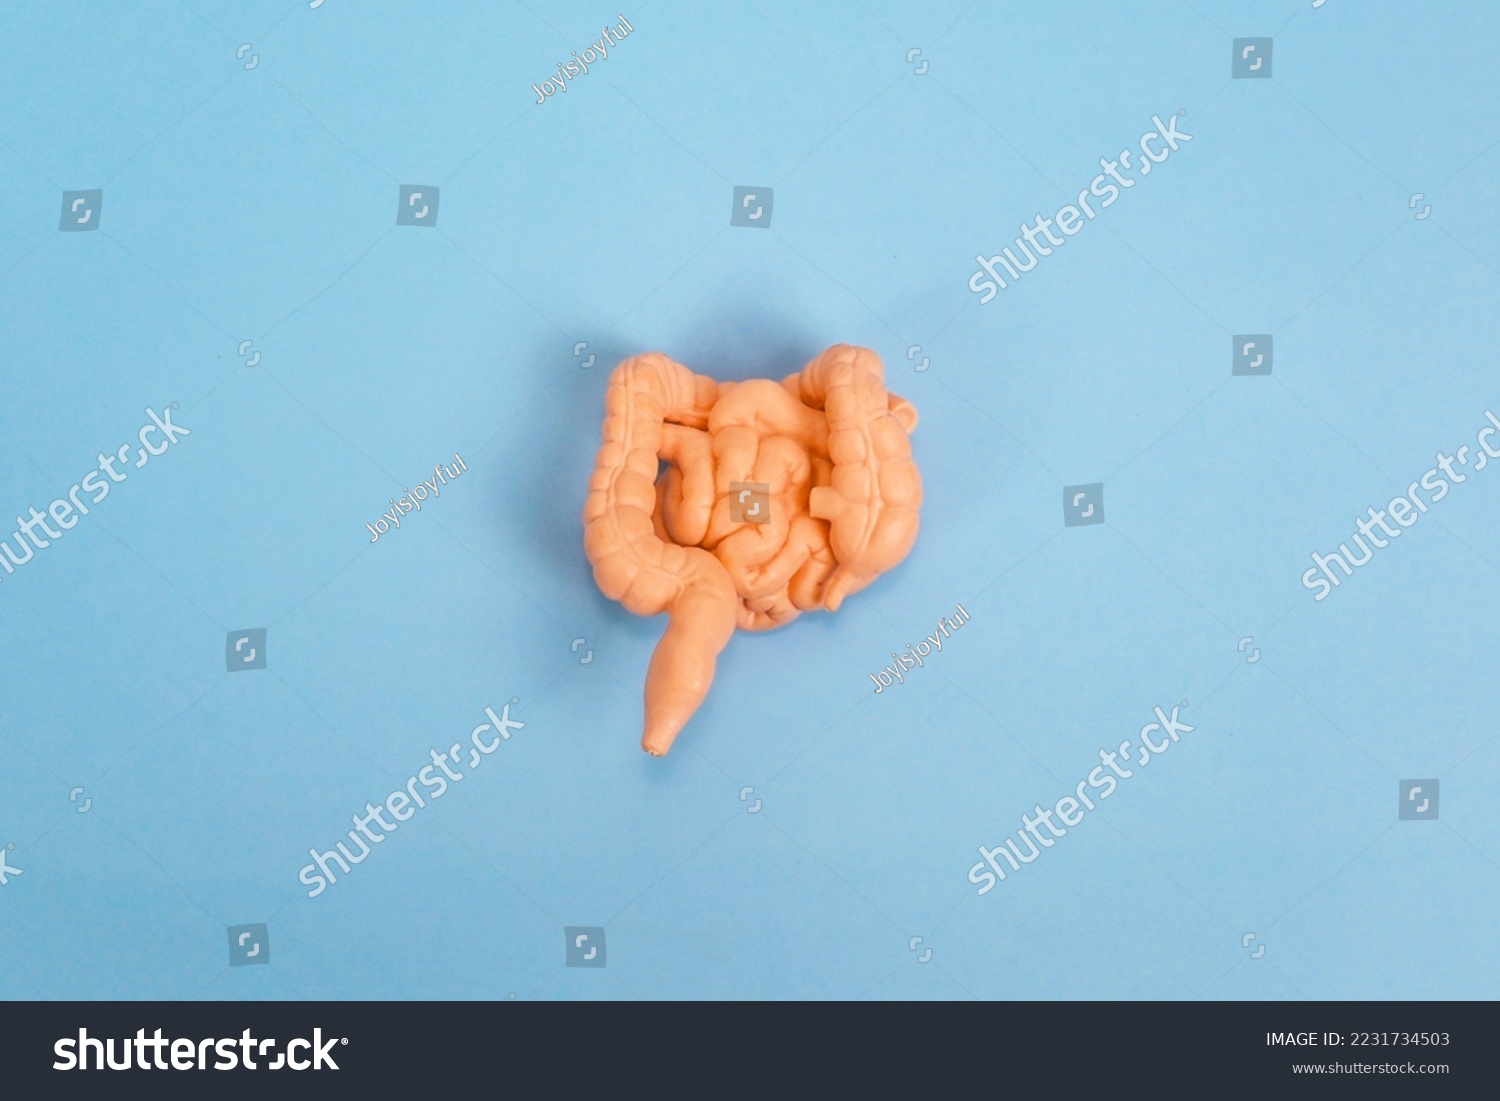 human intestine model on background, education knowledge concept , health issue #2231734503